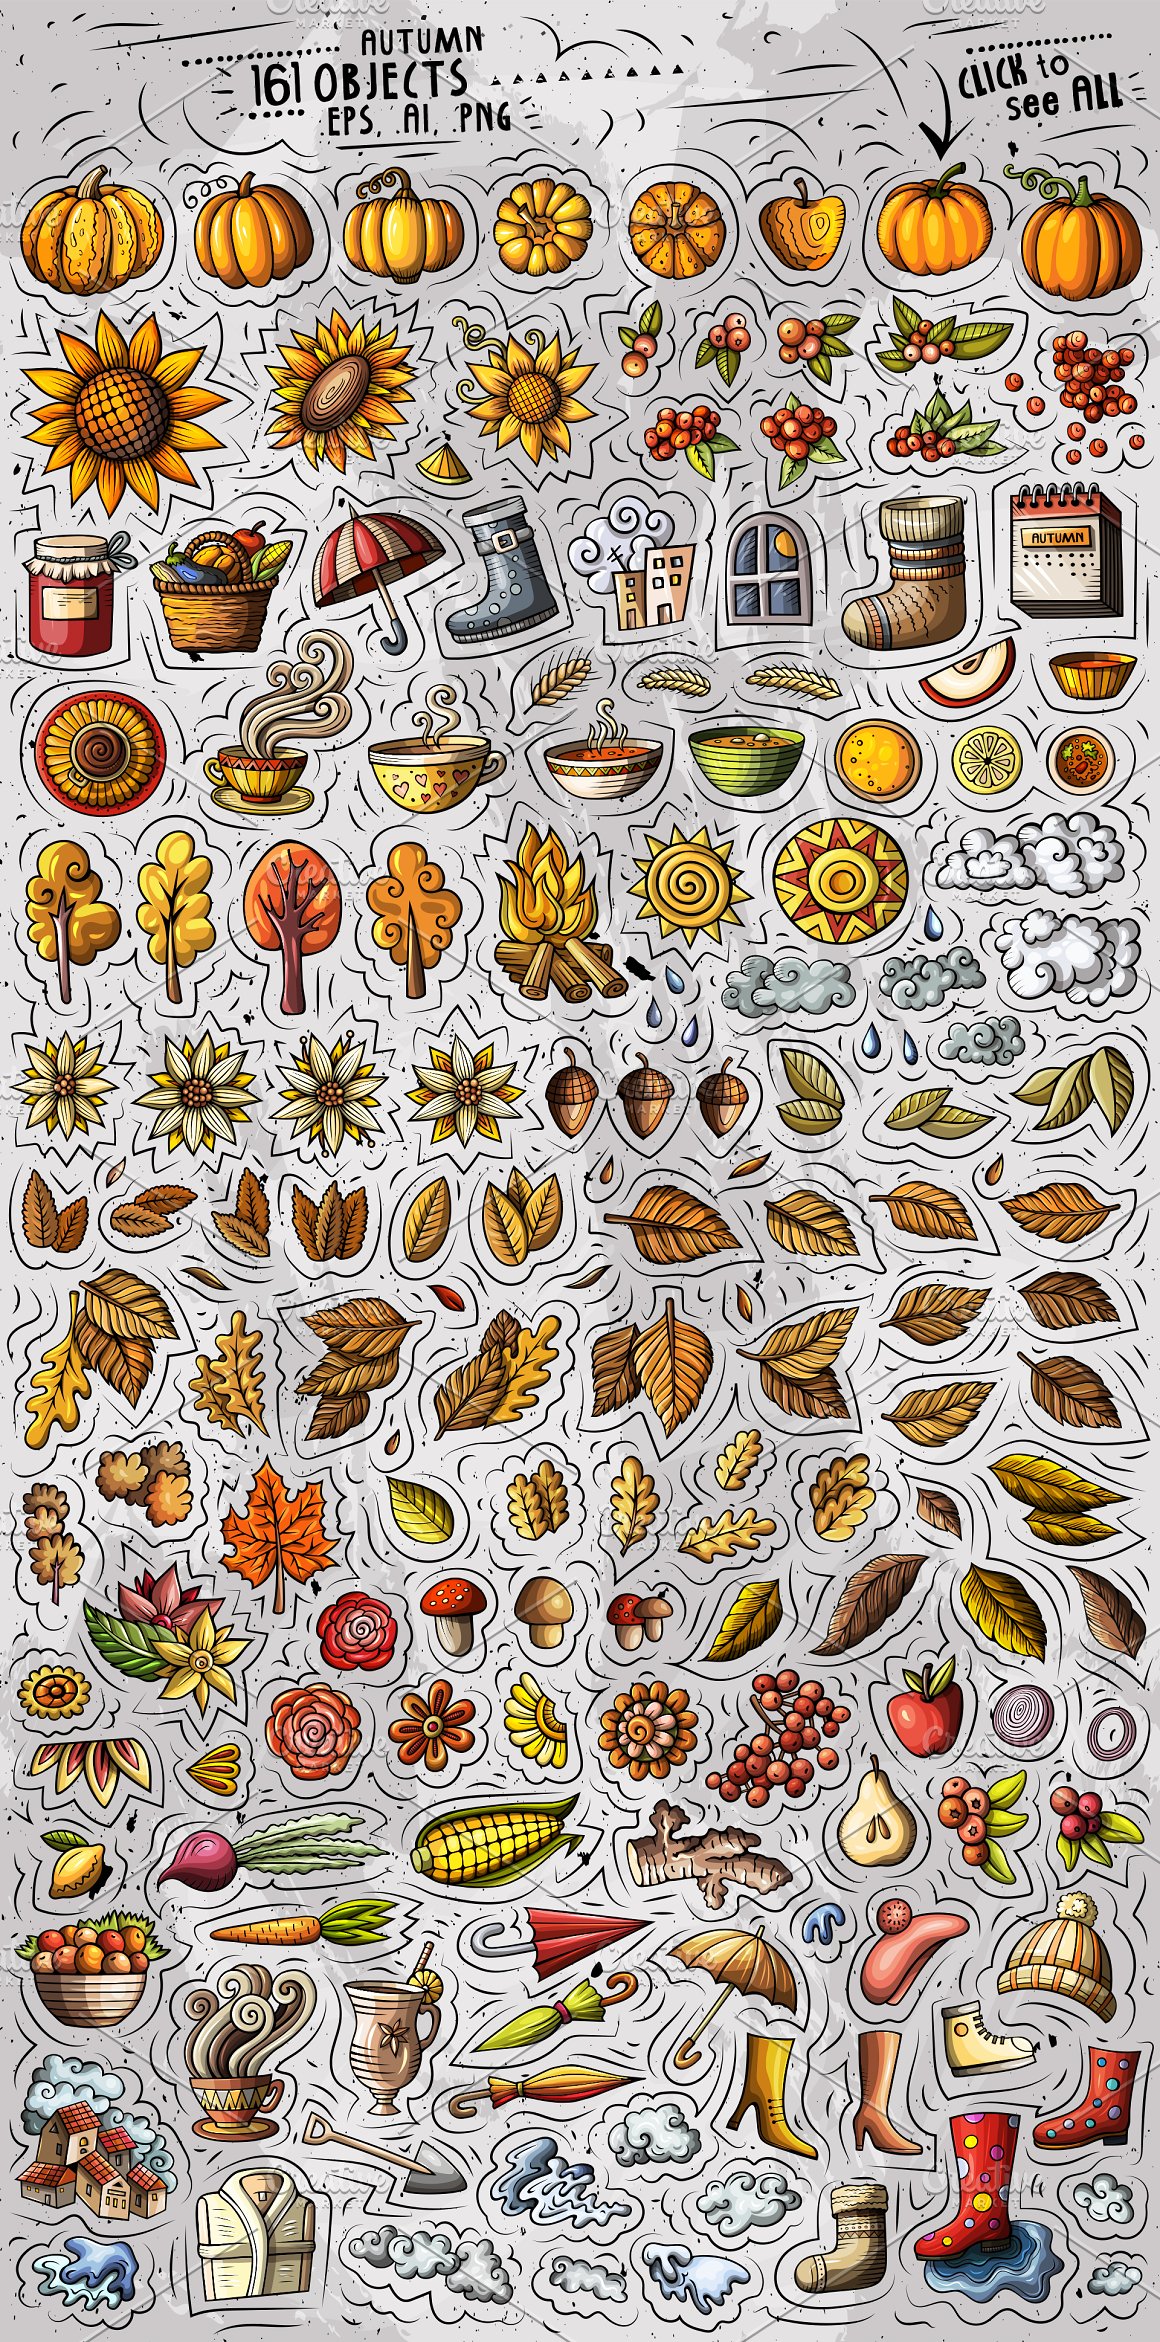 Interesting icons with leaves, acorns, cups, vegetables.